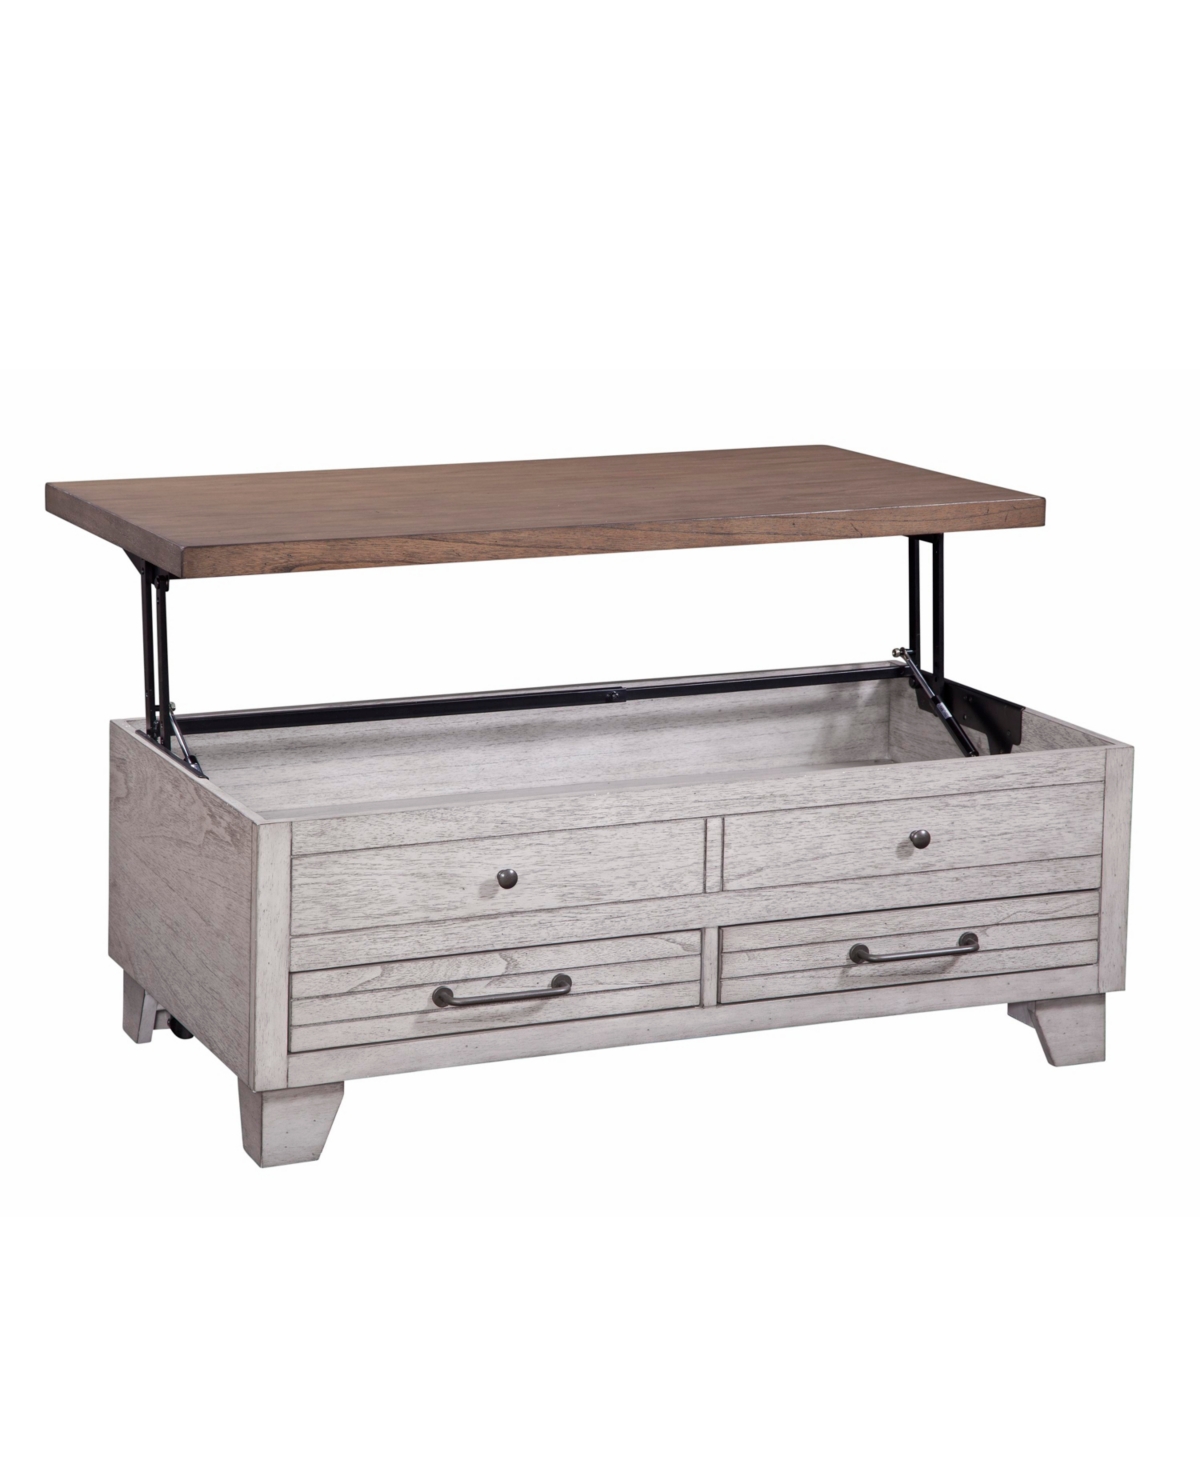 Steve Silver Bear Creek 46" Wooden Lift Top Cocktail Table In Rustic Ivory And Honey